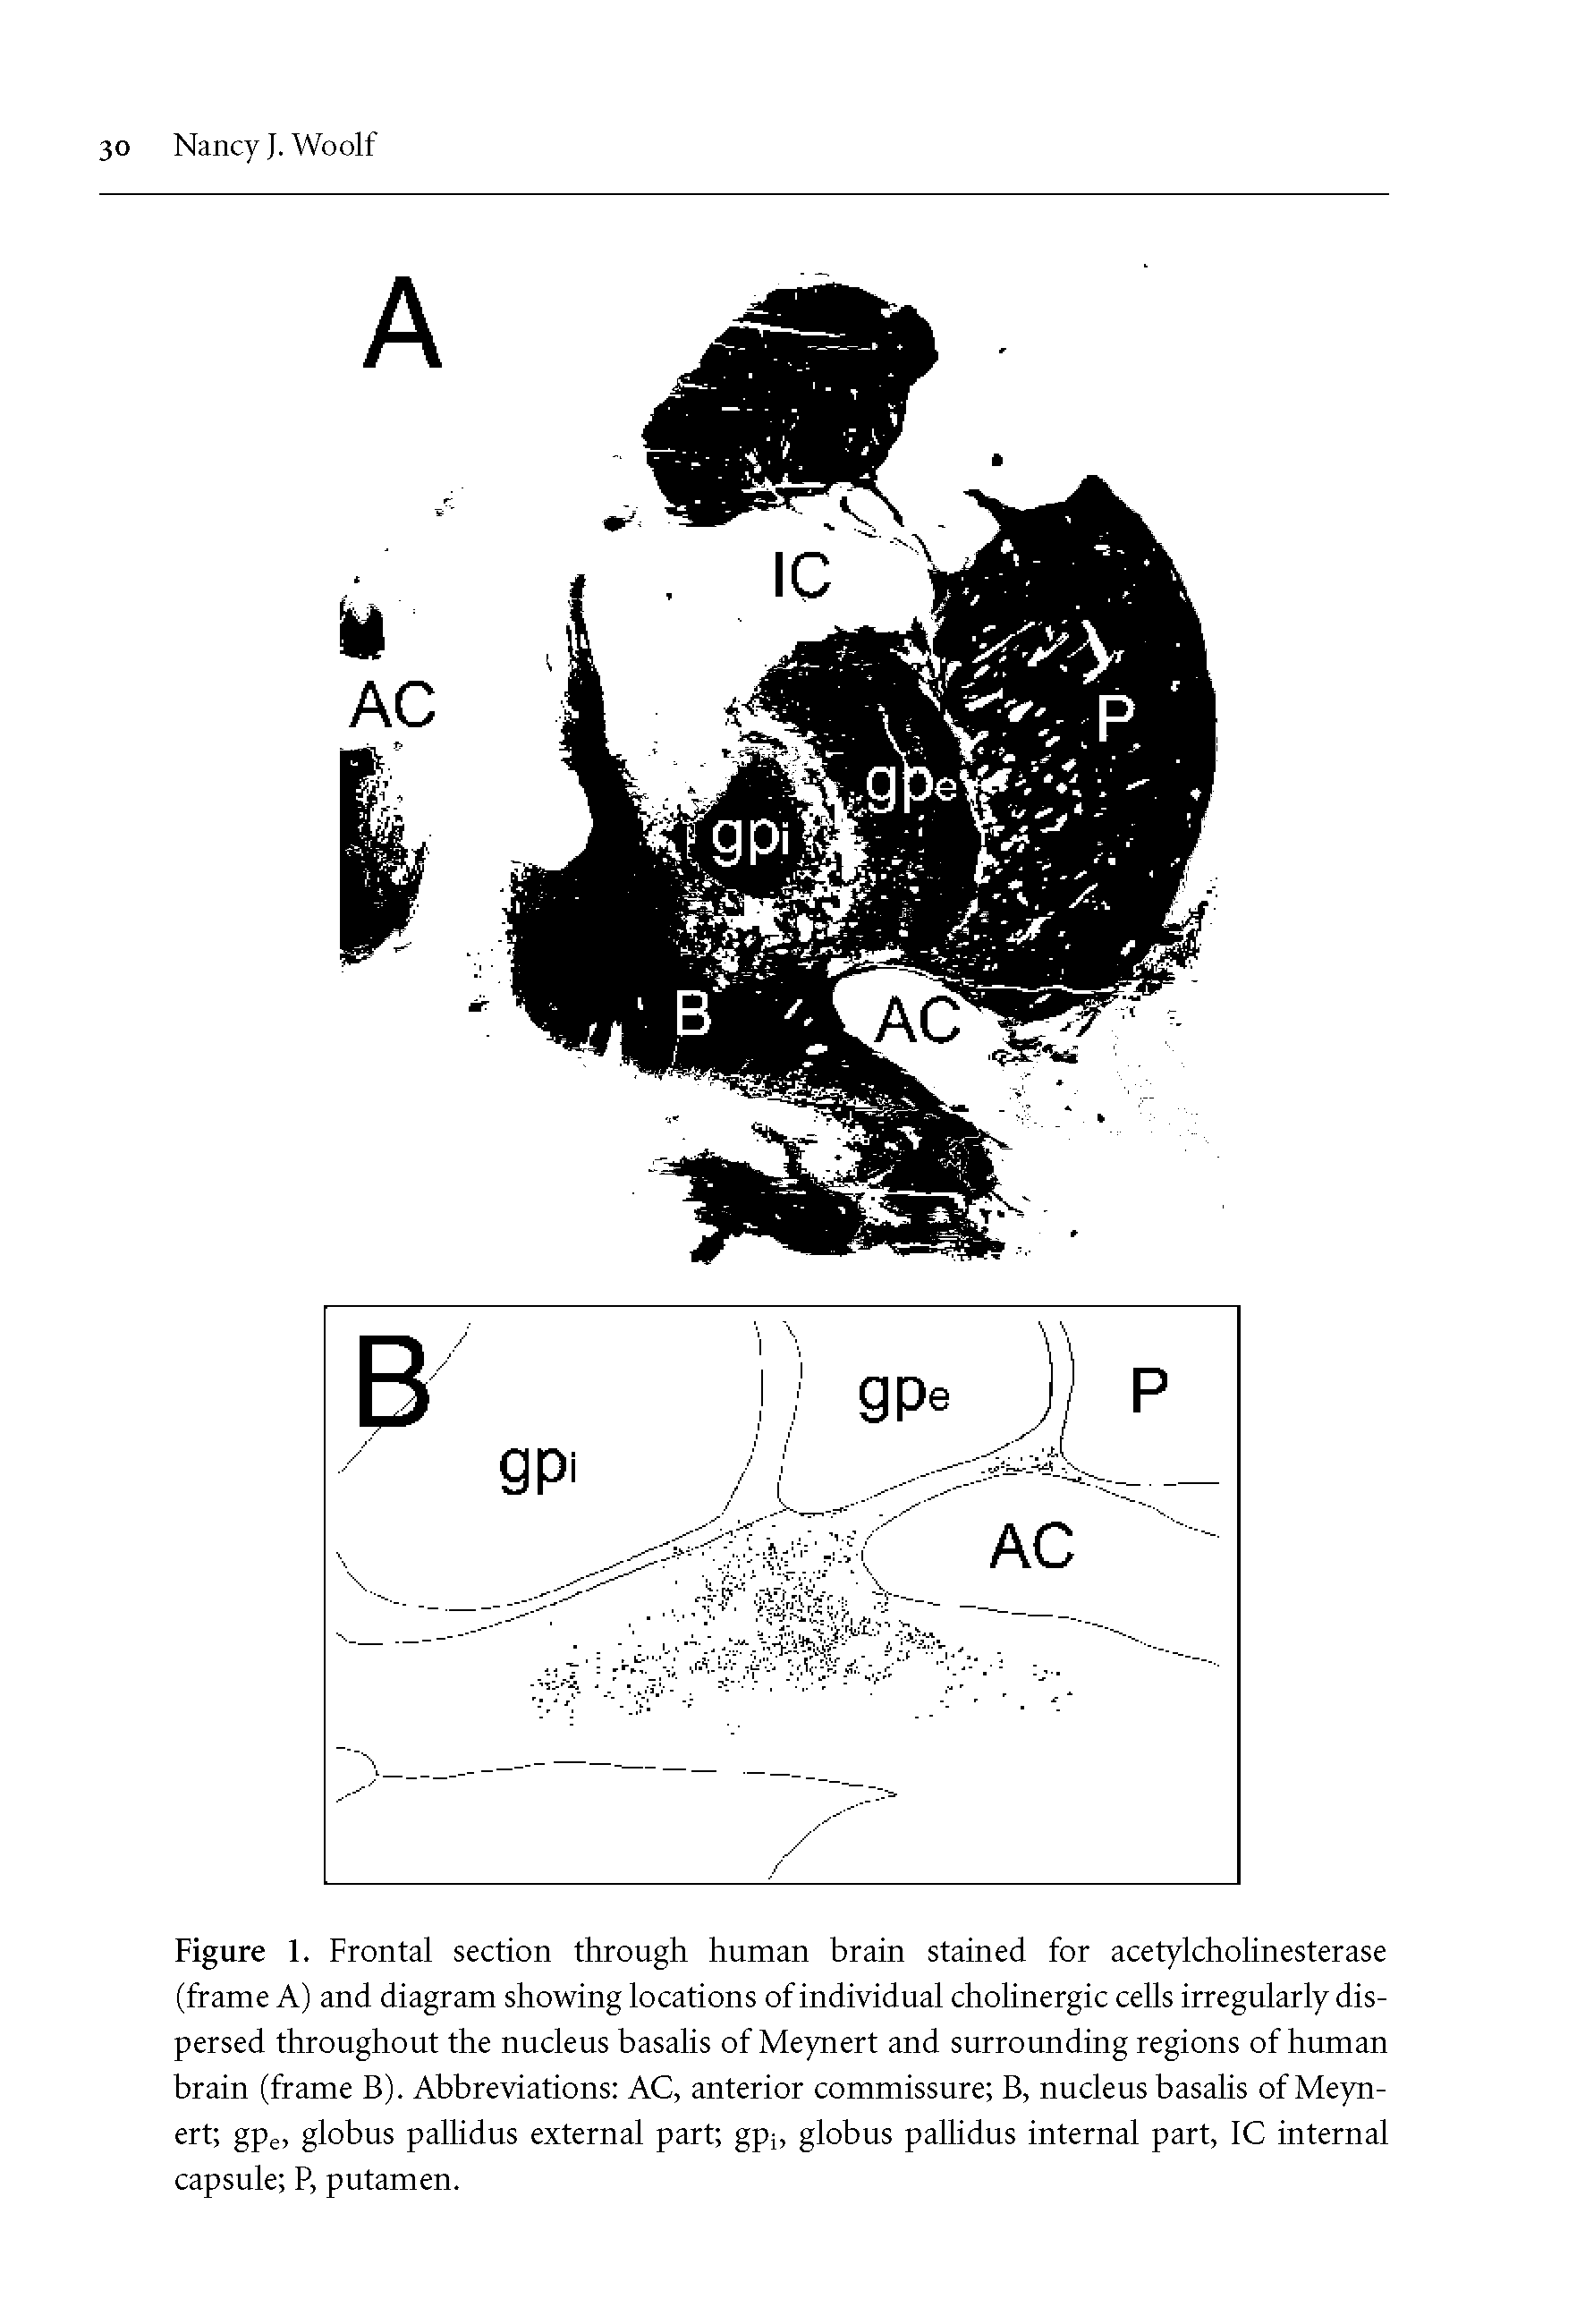 Figure 1. Frontal section through human brain stained for acetylcholinesterase (frame A) and diagram showing locations of individual cholinergic cells irregularly dispersed throughout the nucleus basalis of Meynert and surrounding regions of human brain (frame B). Abbreviations AC, anterior commissure B, nucleus basalis of Meynert gpe, globus pallidus external part gpi, globus pallidus internal part, 1C internal capsule P, putamen.